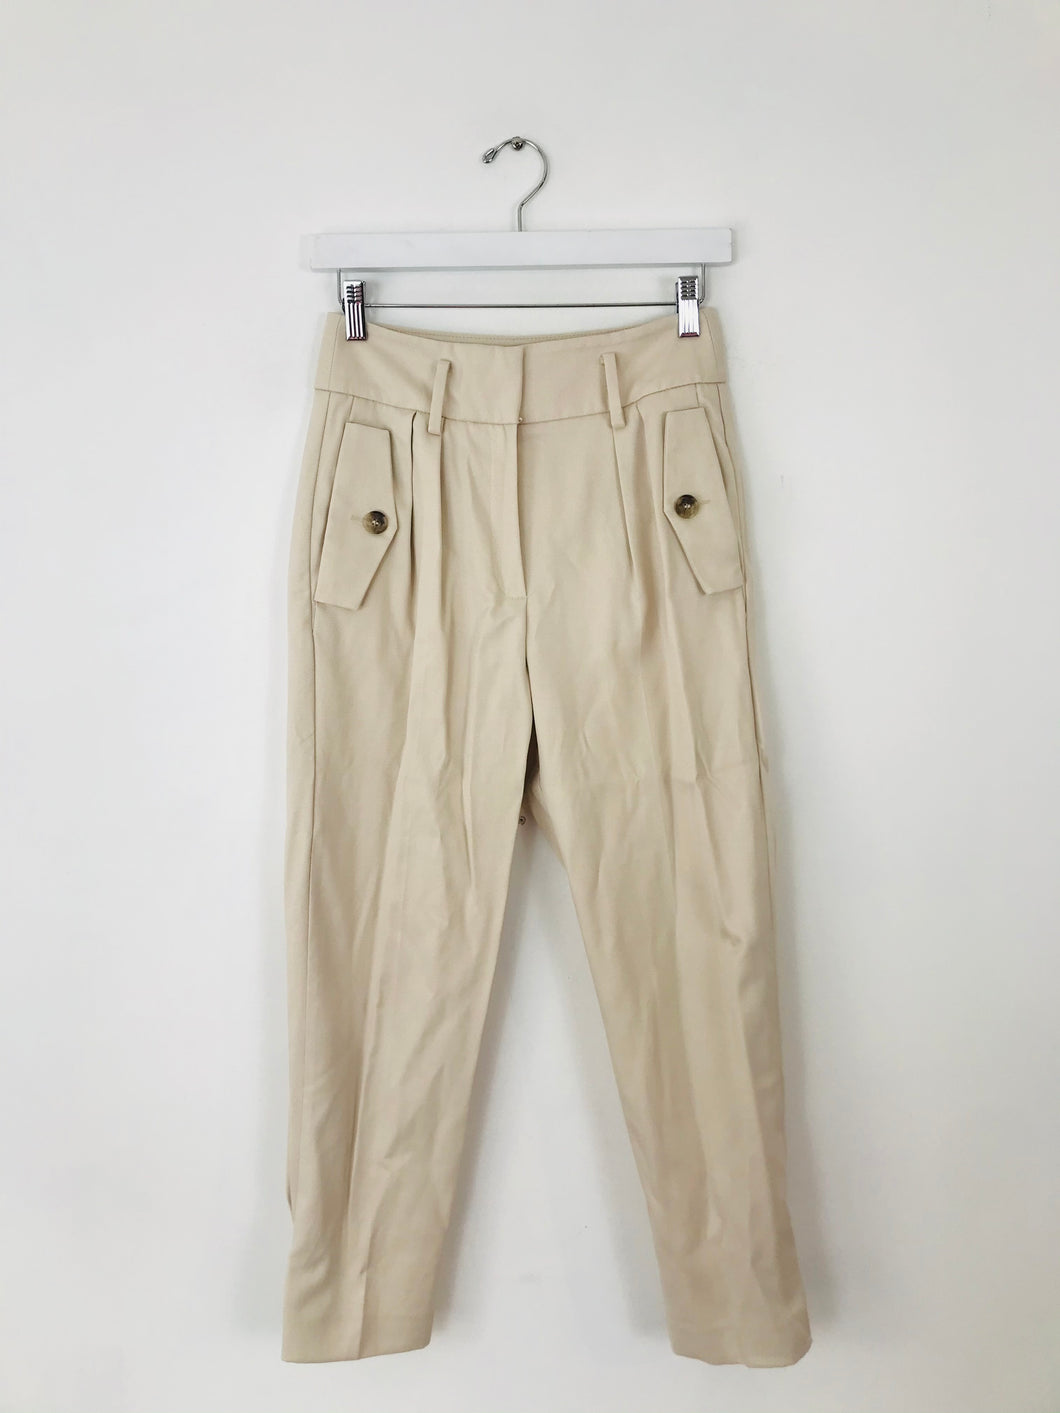 Reiss Women’s Relaxed Fit Tapered Trousers | UK6 | Cream Beige